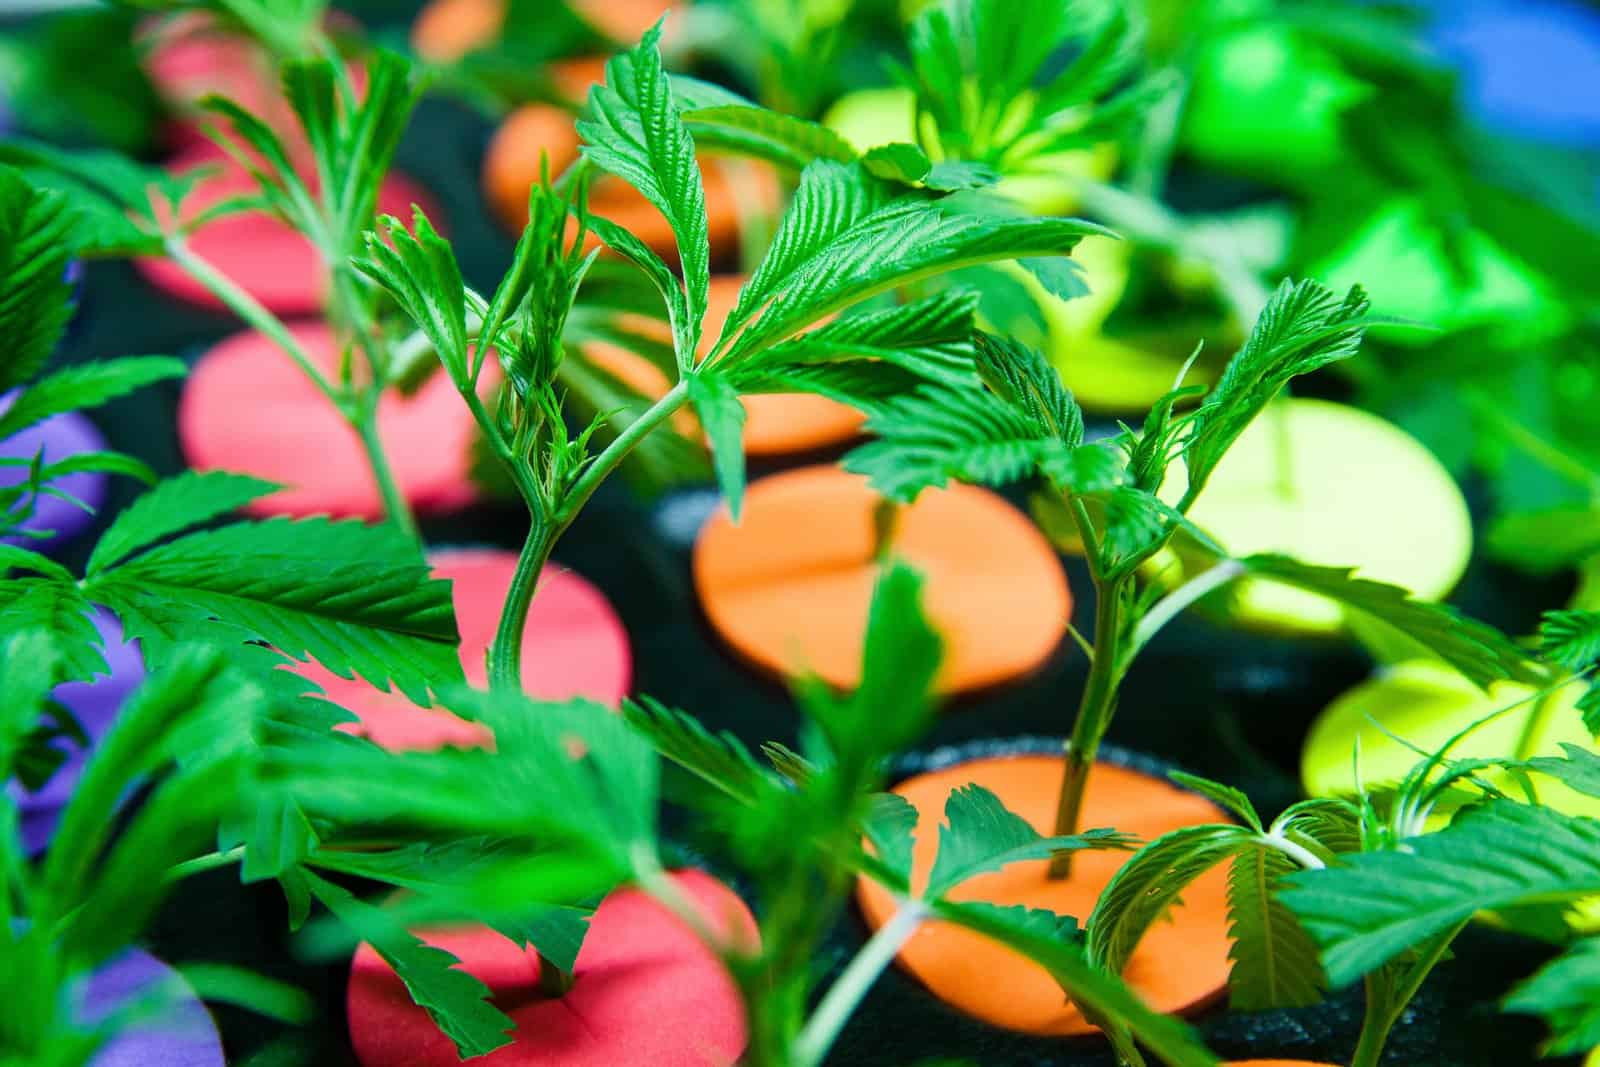 3 Tips to Properly Clean Your Cannabis Grow Room